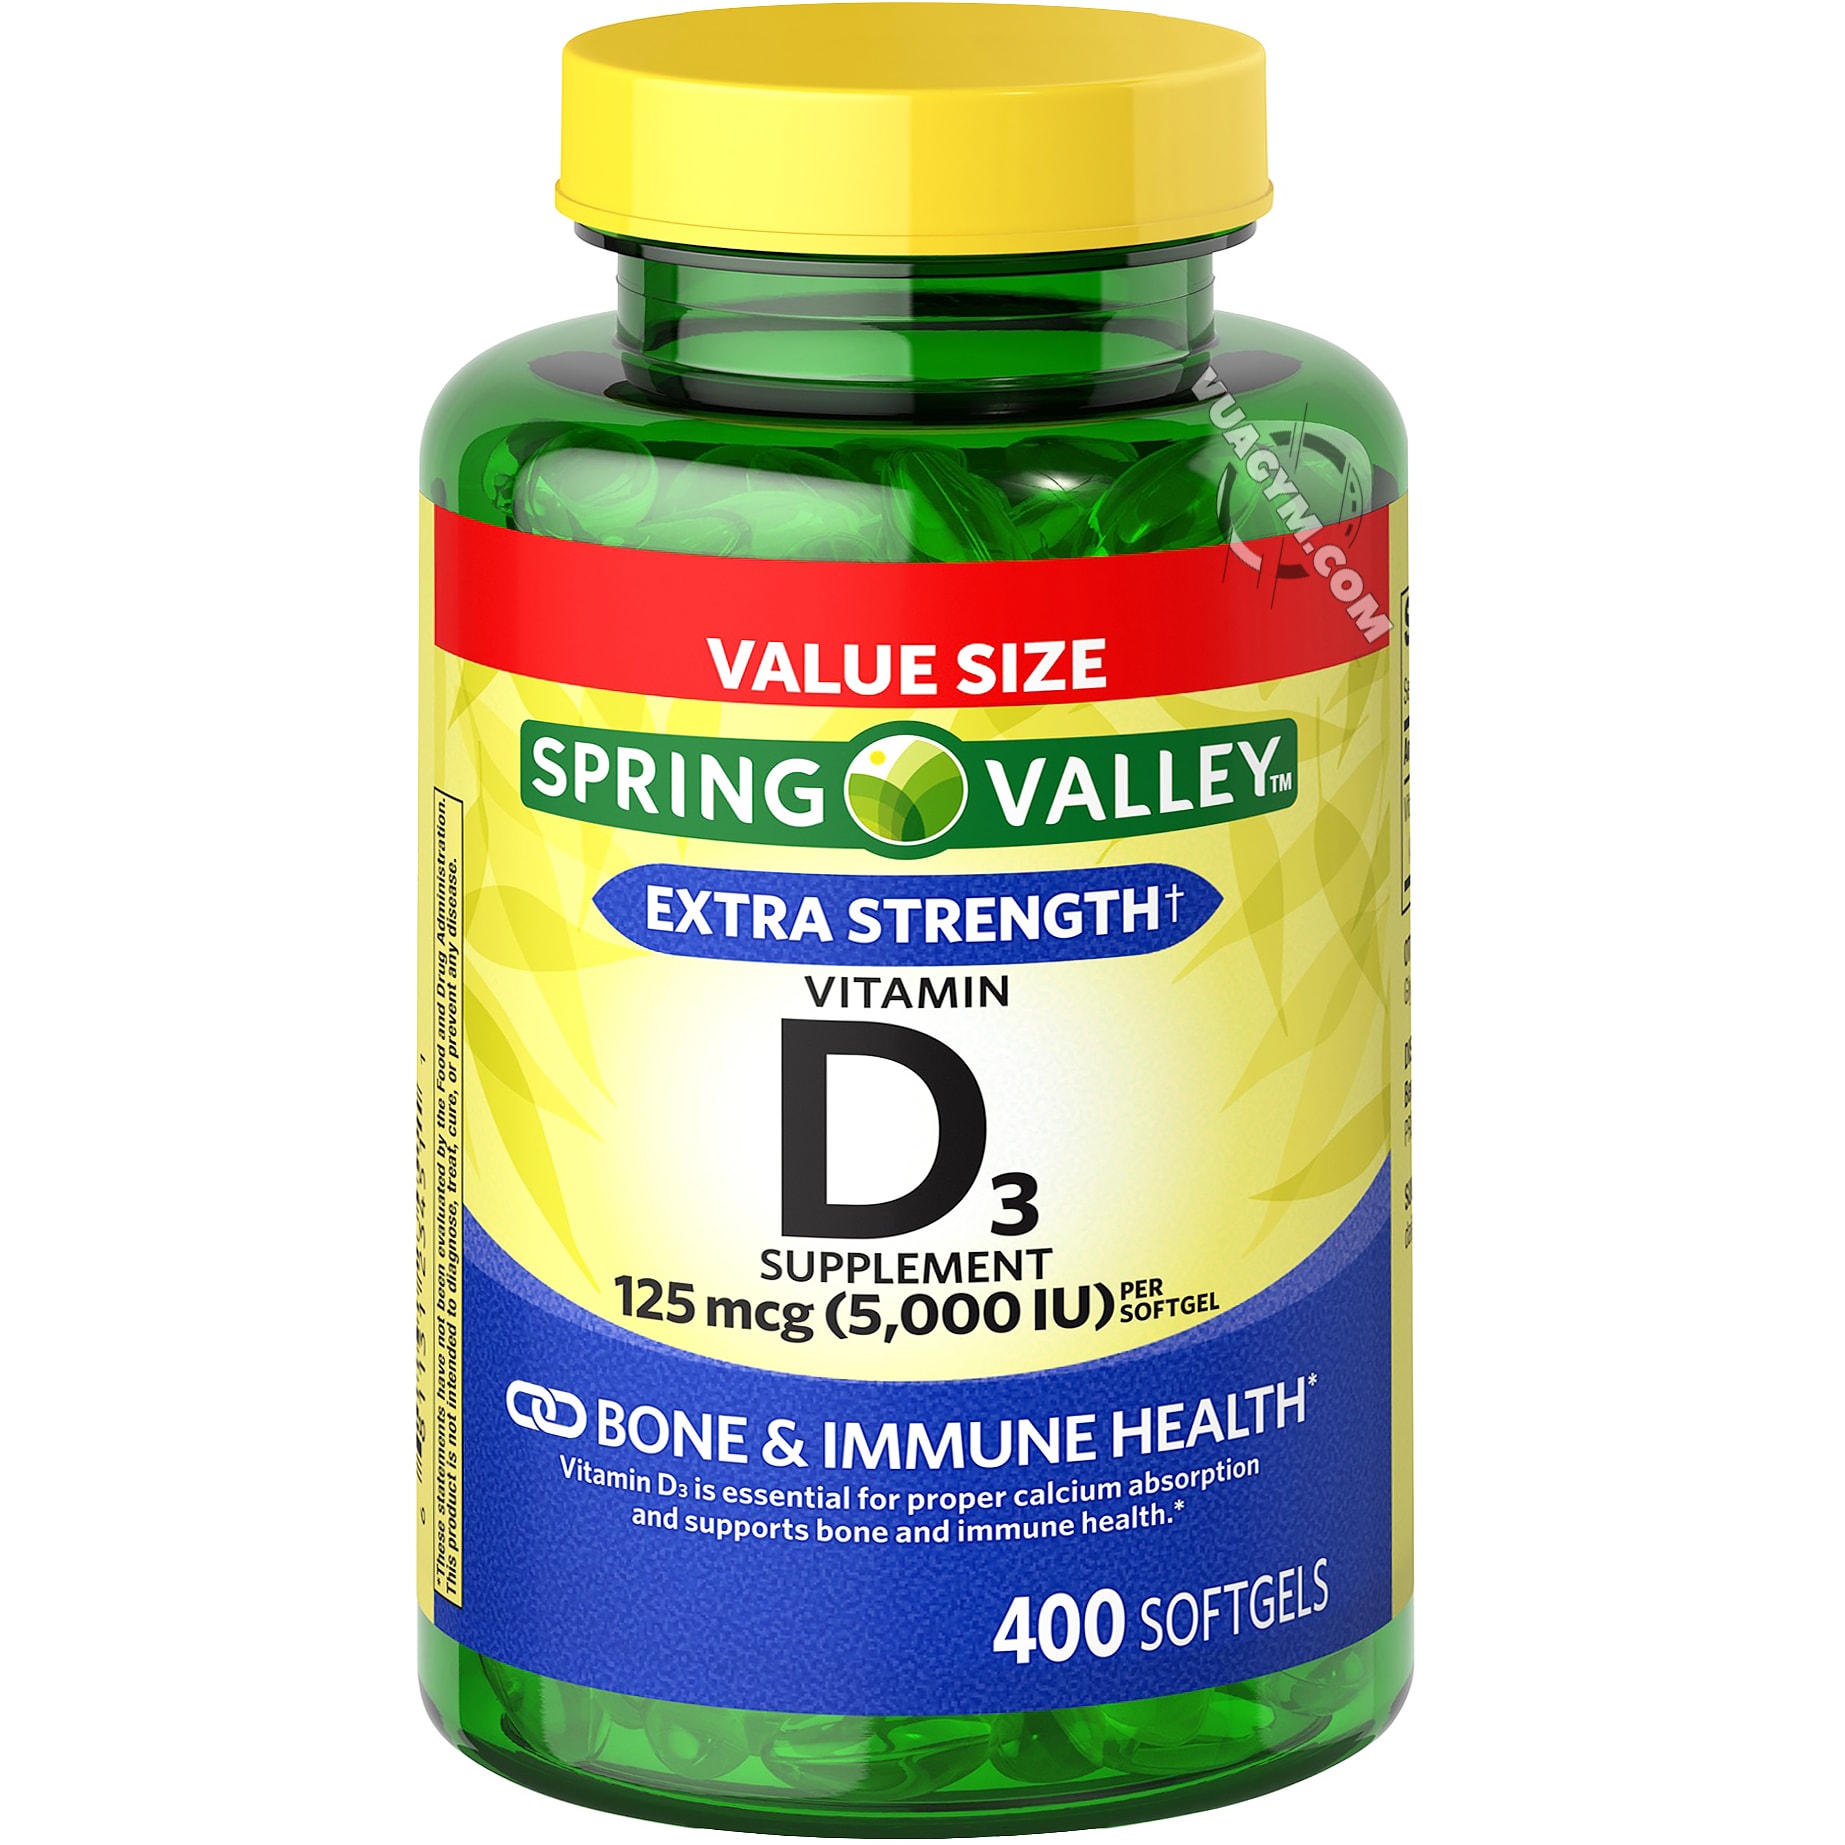 What is the price of Spring Valley D3 Vitamin 5000IU and where can I purchase it online?